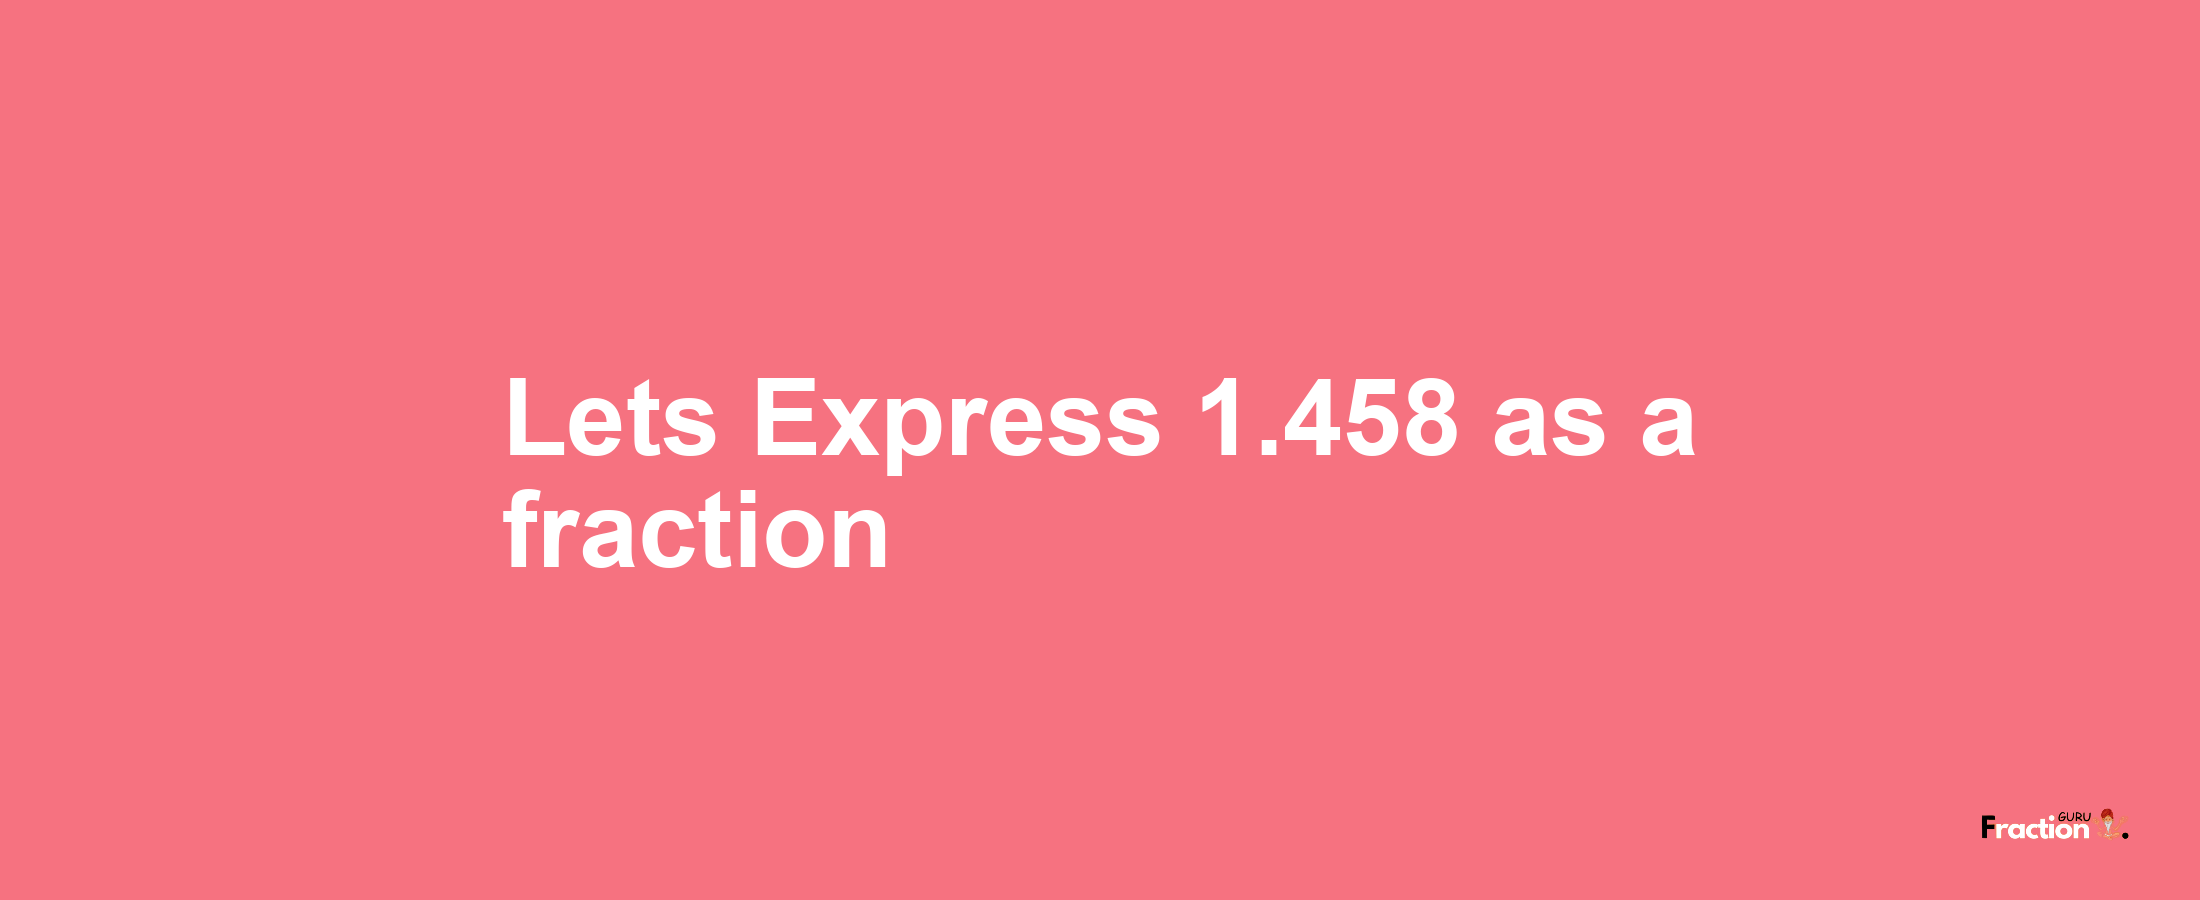 Lets Express 1.458 as afraction